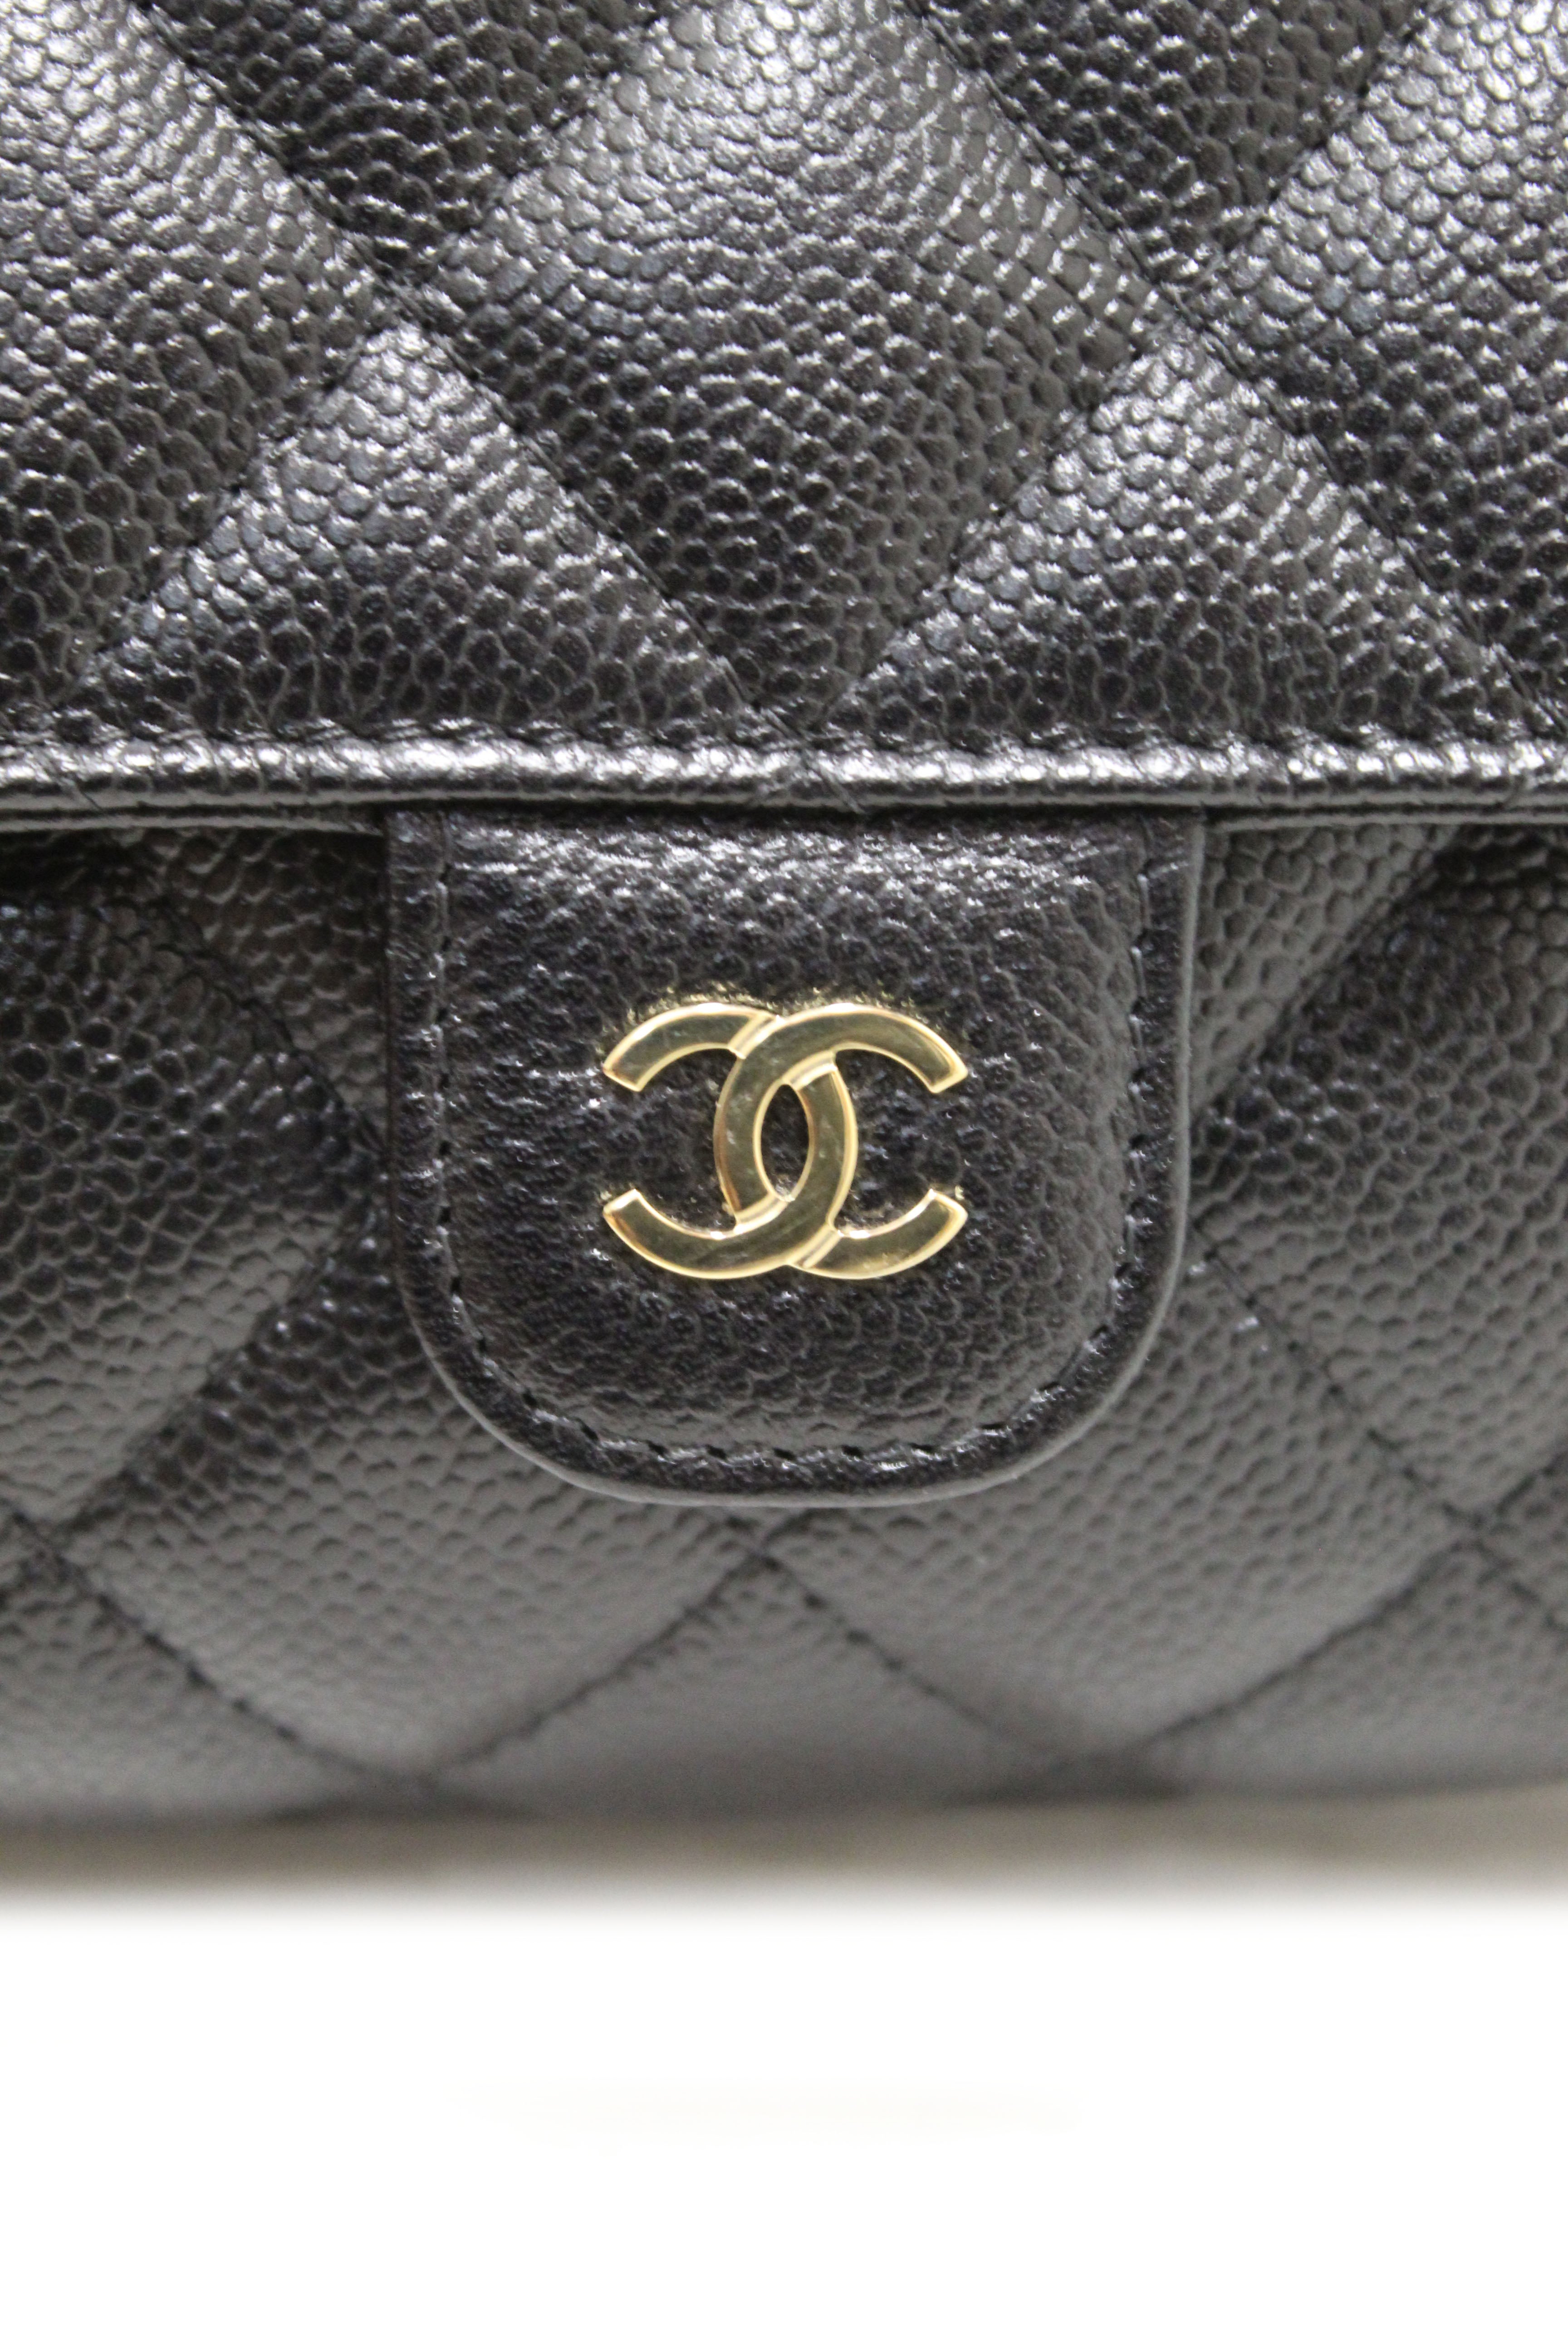 Authentic Chanel Black Caviar Quilted Leather Phone Bag On Chain Crossbody Bag